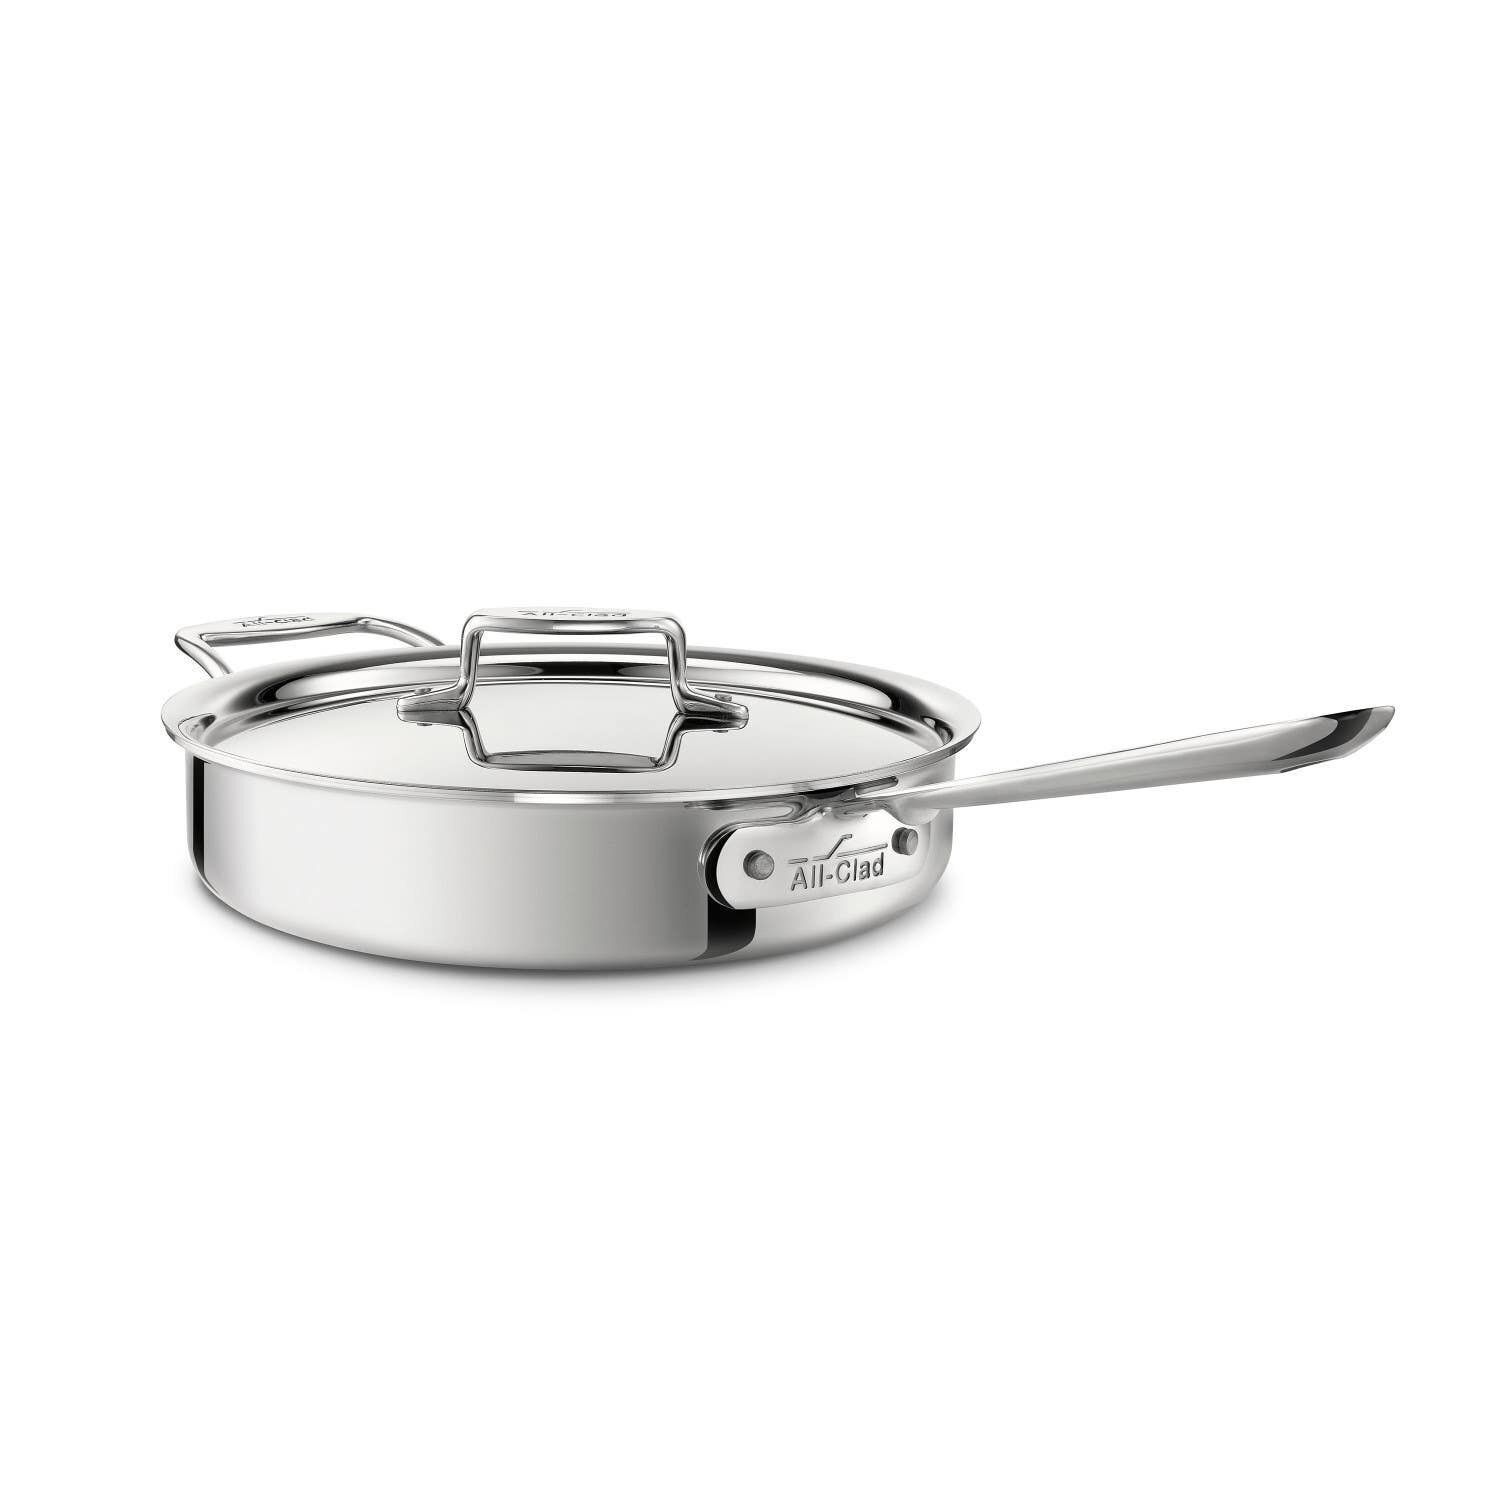 D5 Stainless Polished 5-ply Bonded Cookware, Sauce Pan with lid, 4 quart